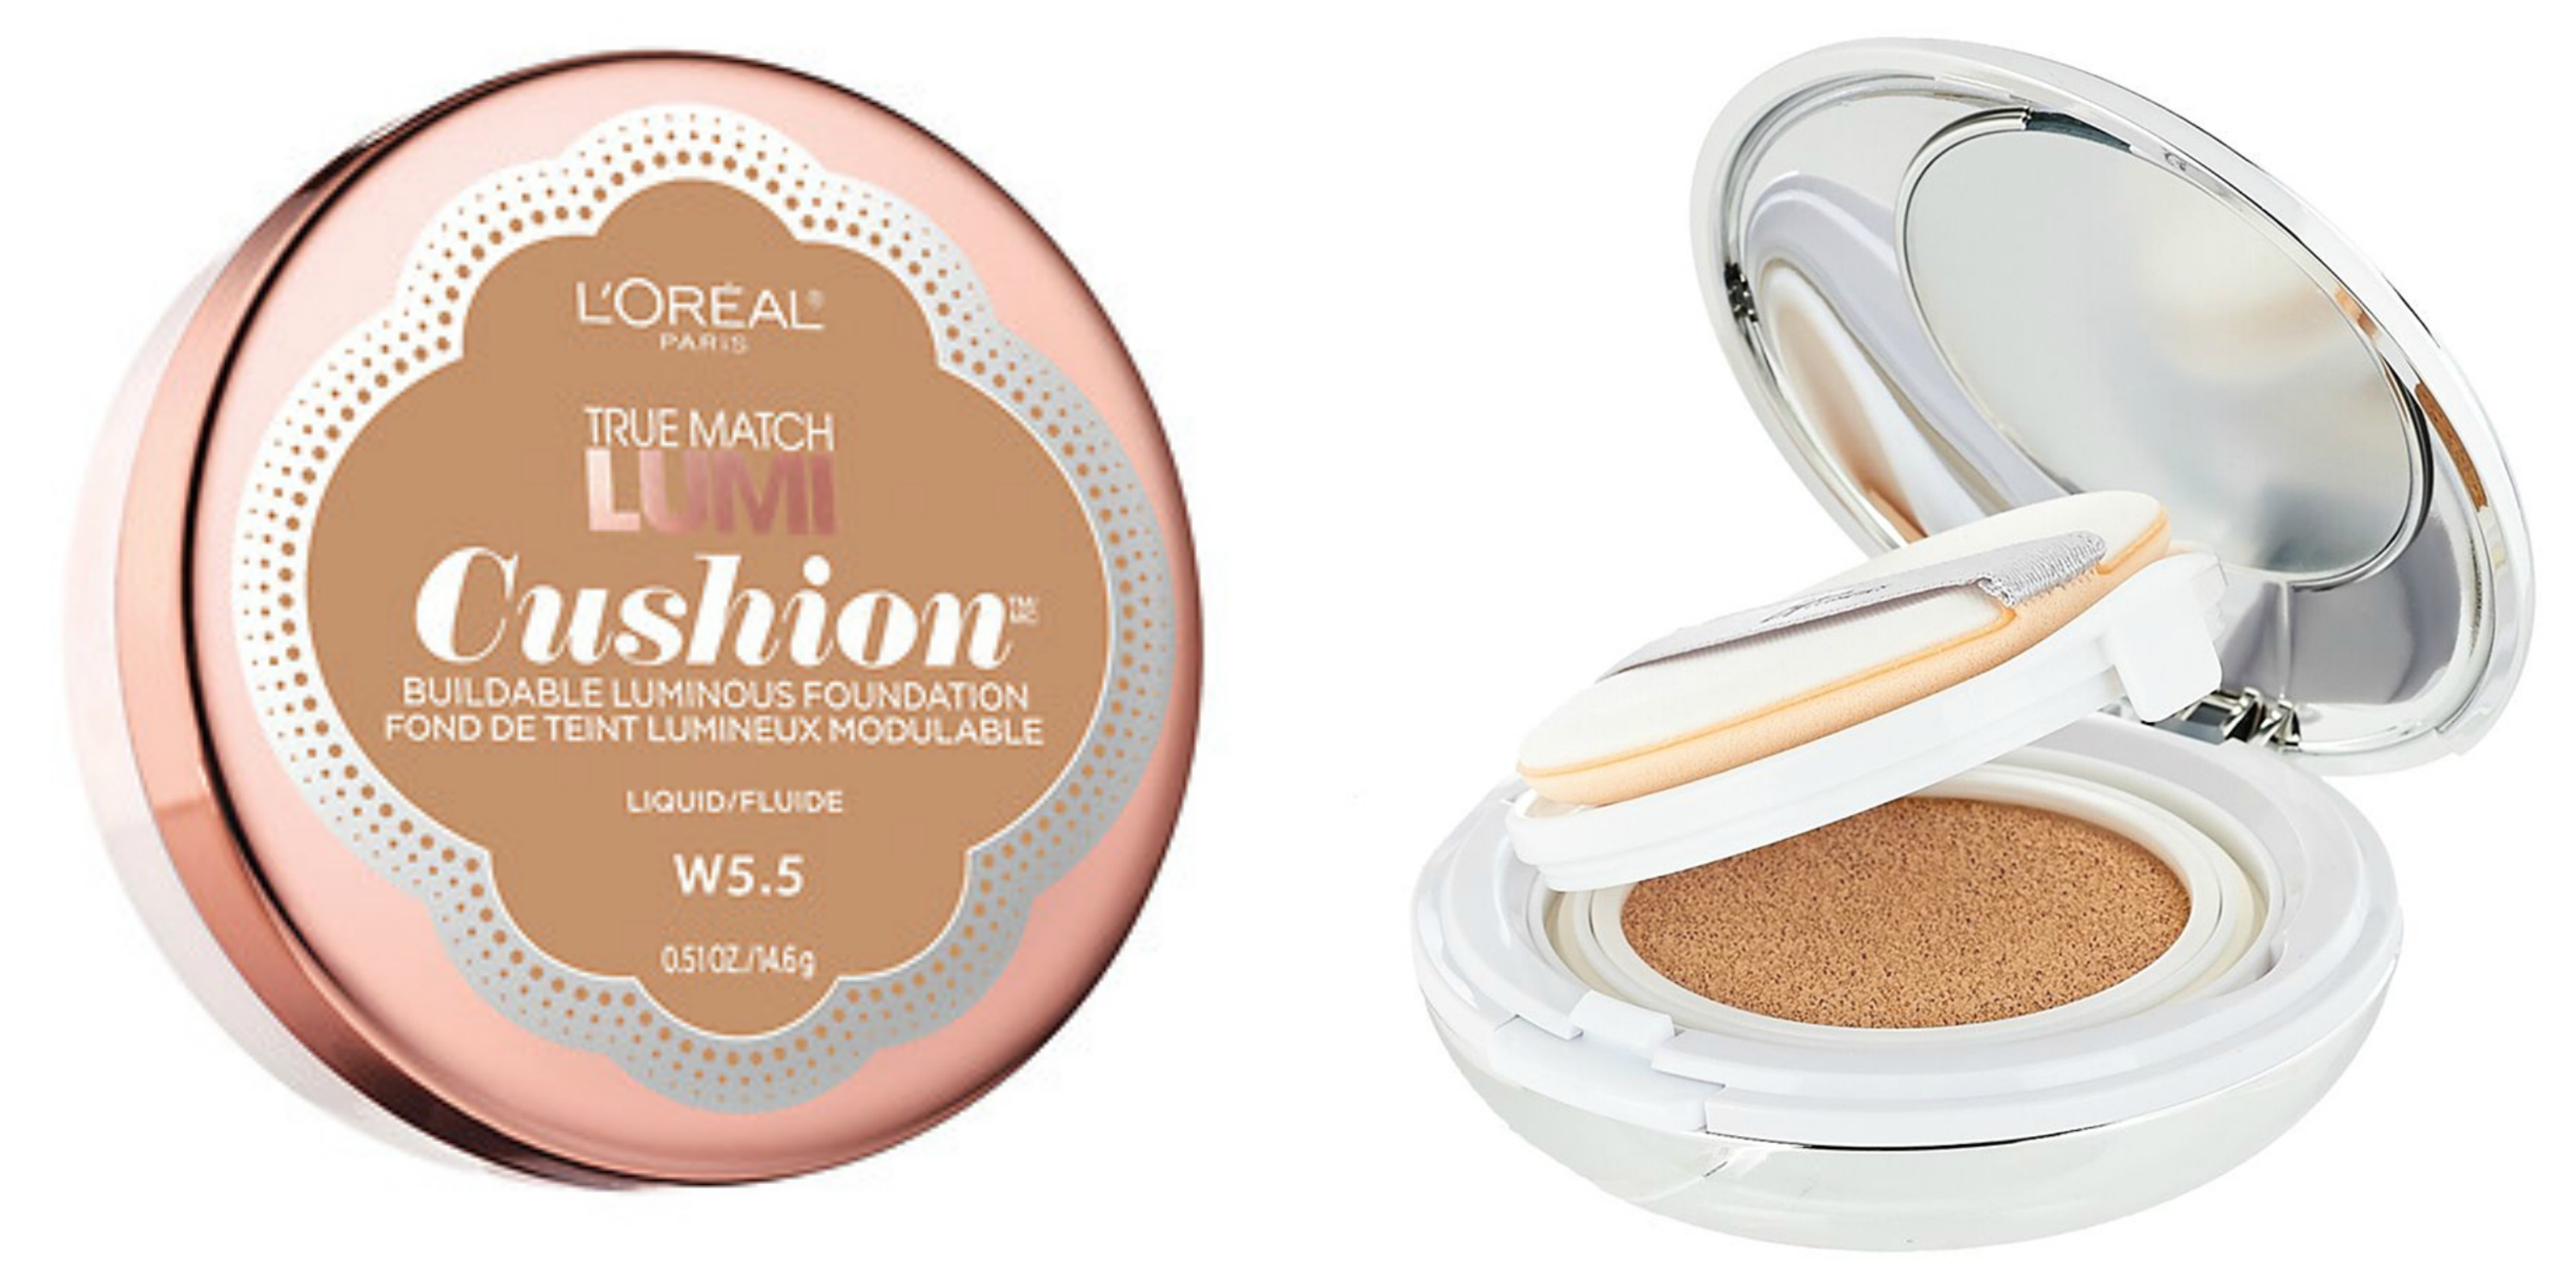 it Cosmetics and L'Oreal Cushion Compact Foundations